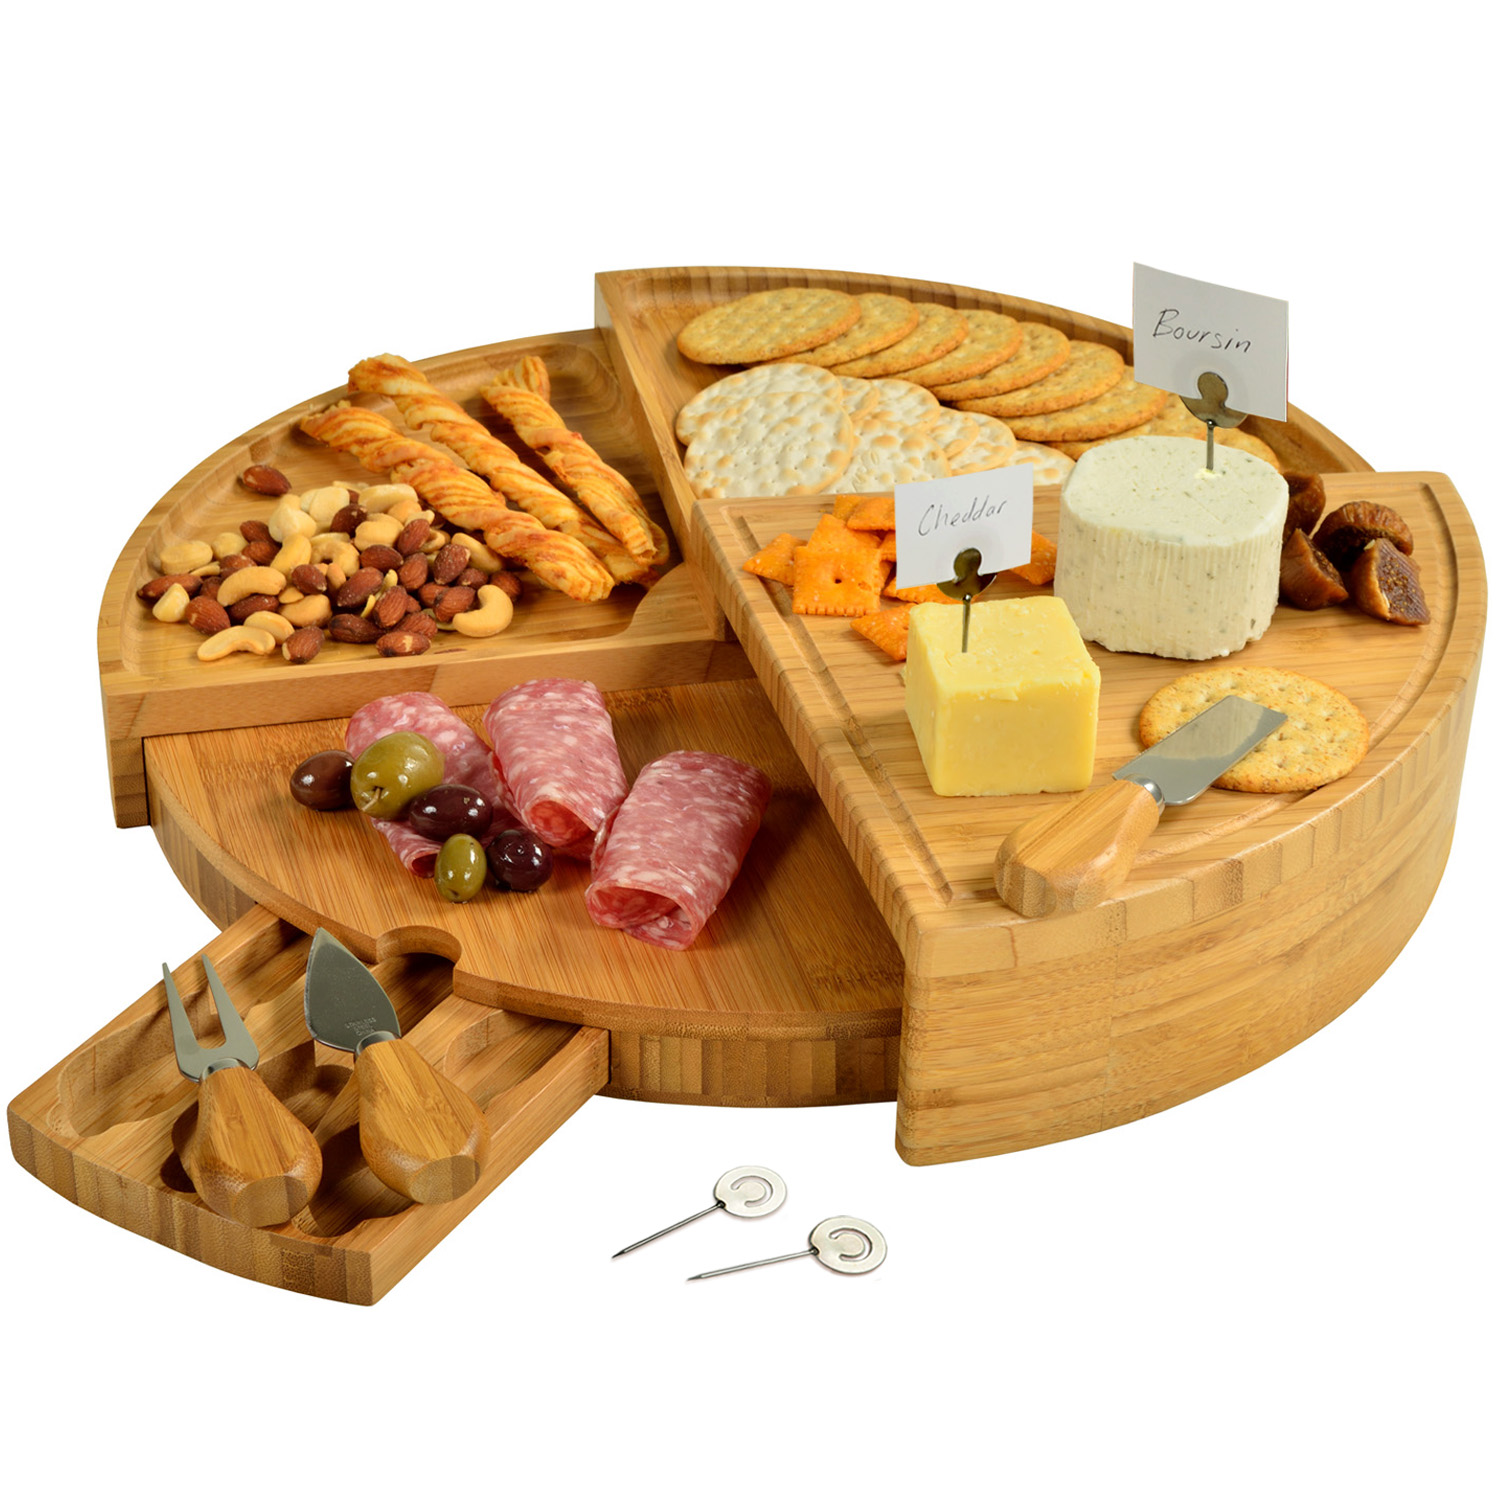 Bamboo Cutting Board for Cheese & Charcuterie with Knives & Cheese Markers- Stores as a Compact Wedge- Opens to 18" Diameter